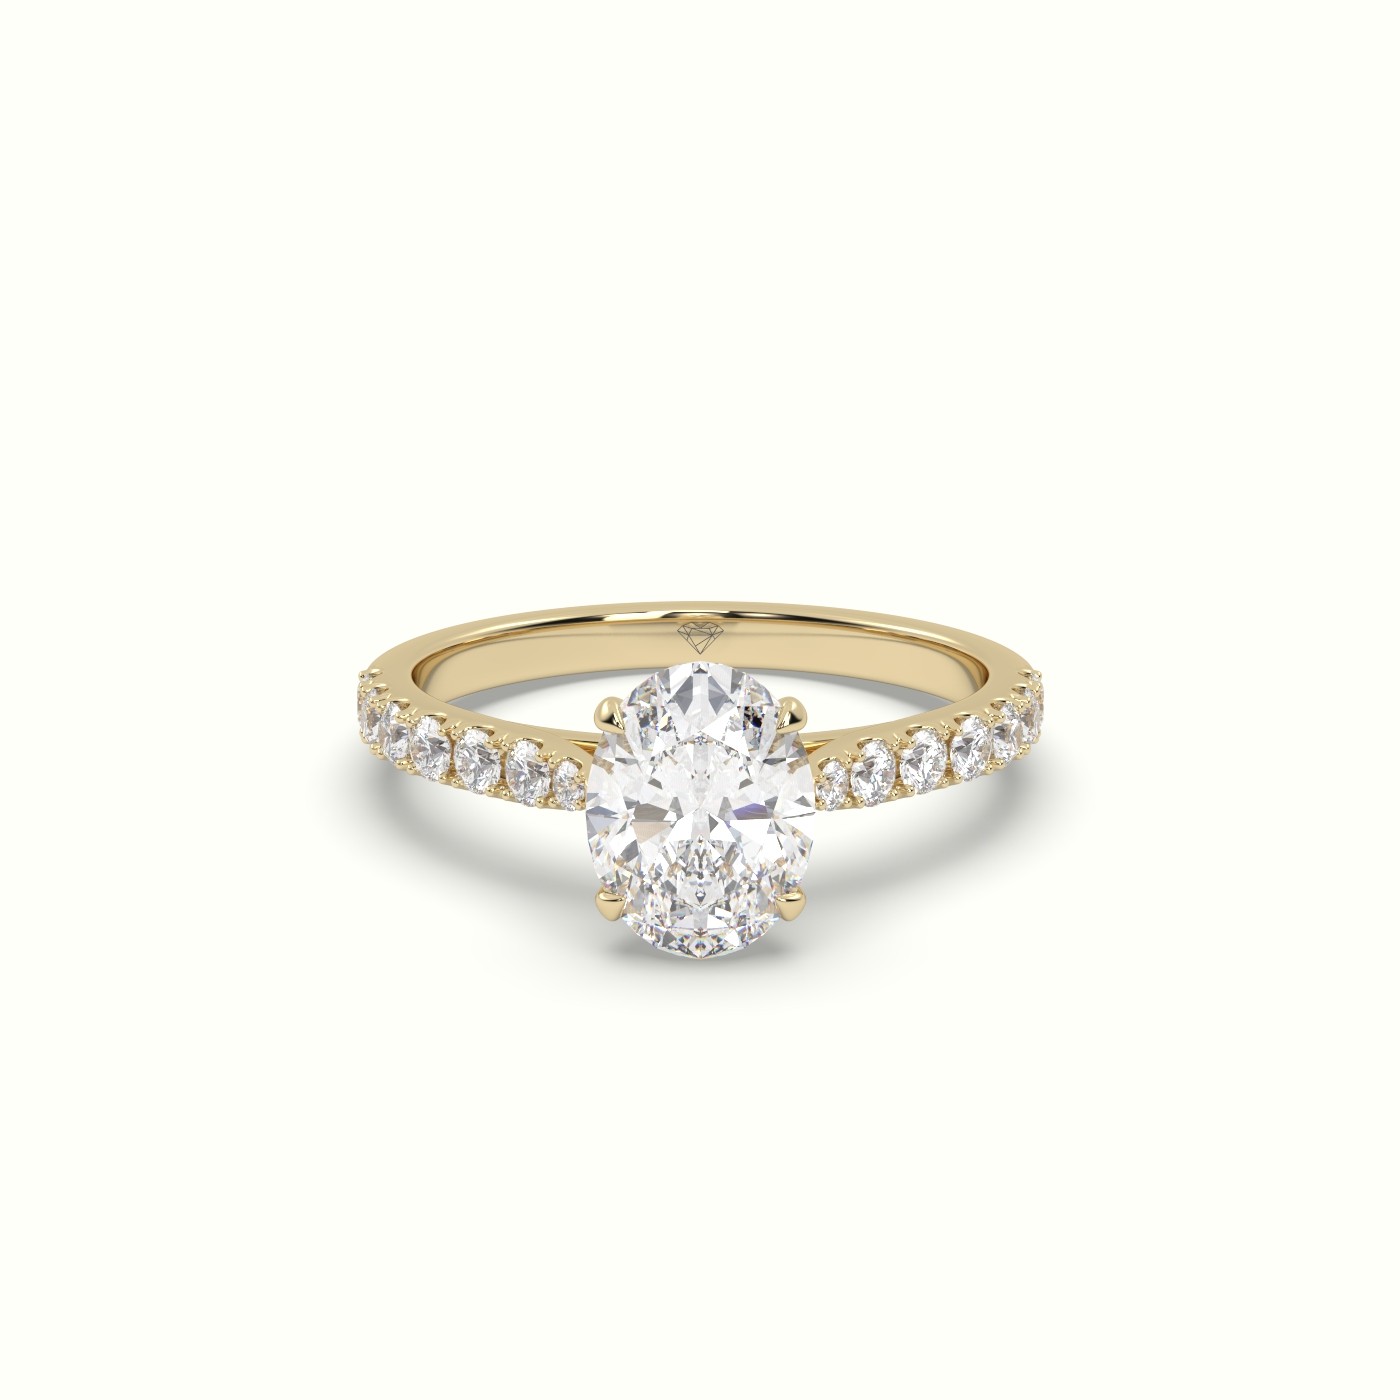 18K Yellow Gold Oval Diamond 4 round prongs Ring with Pave Setting